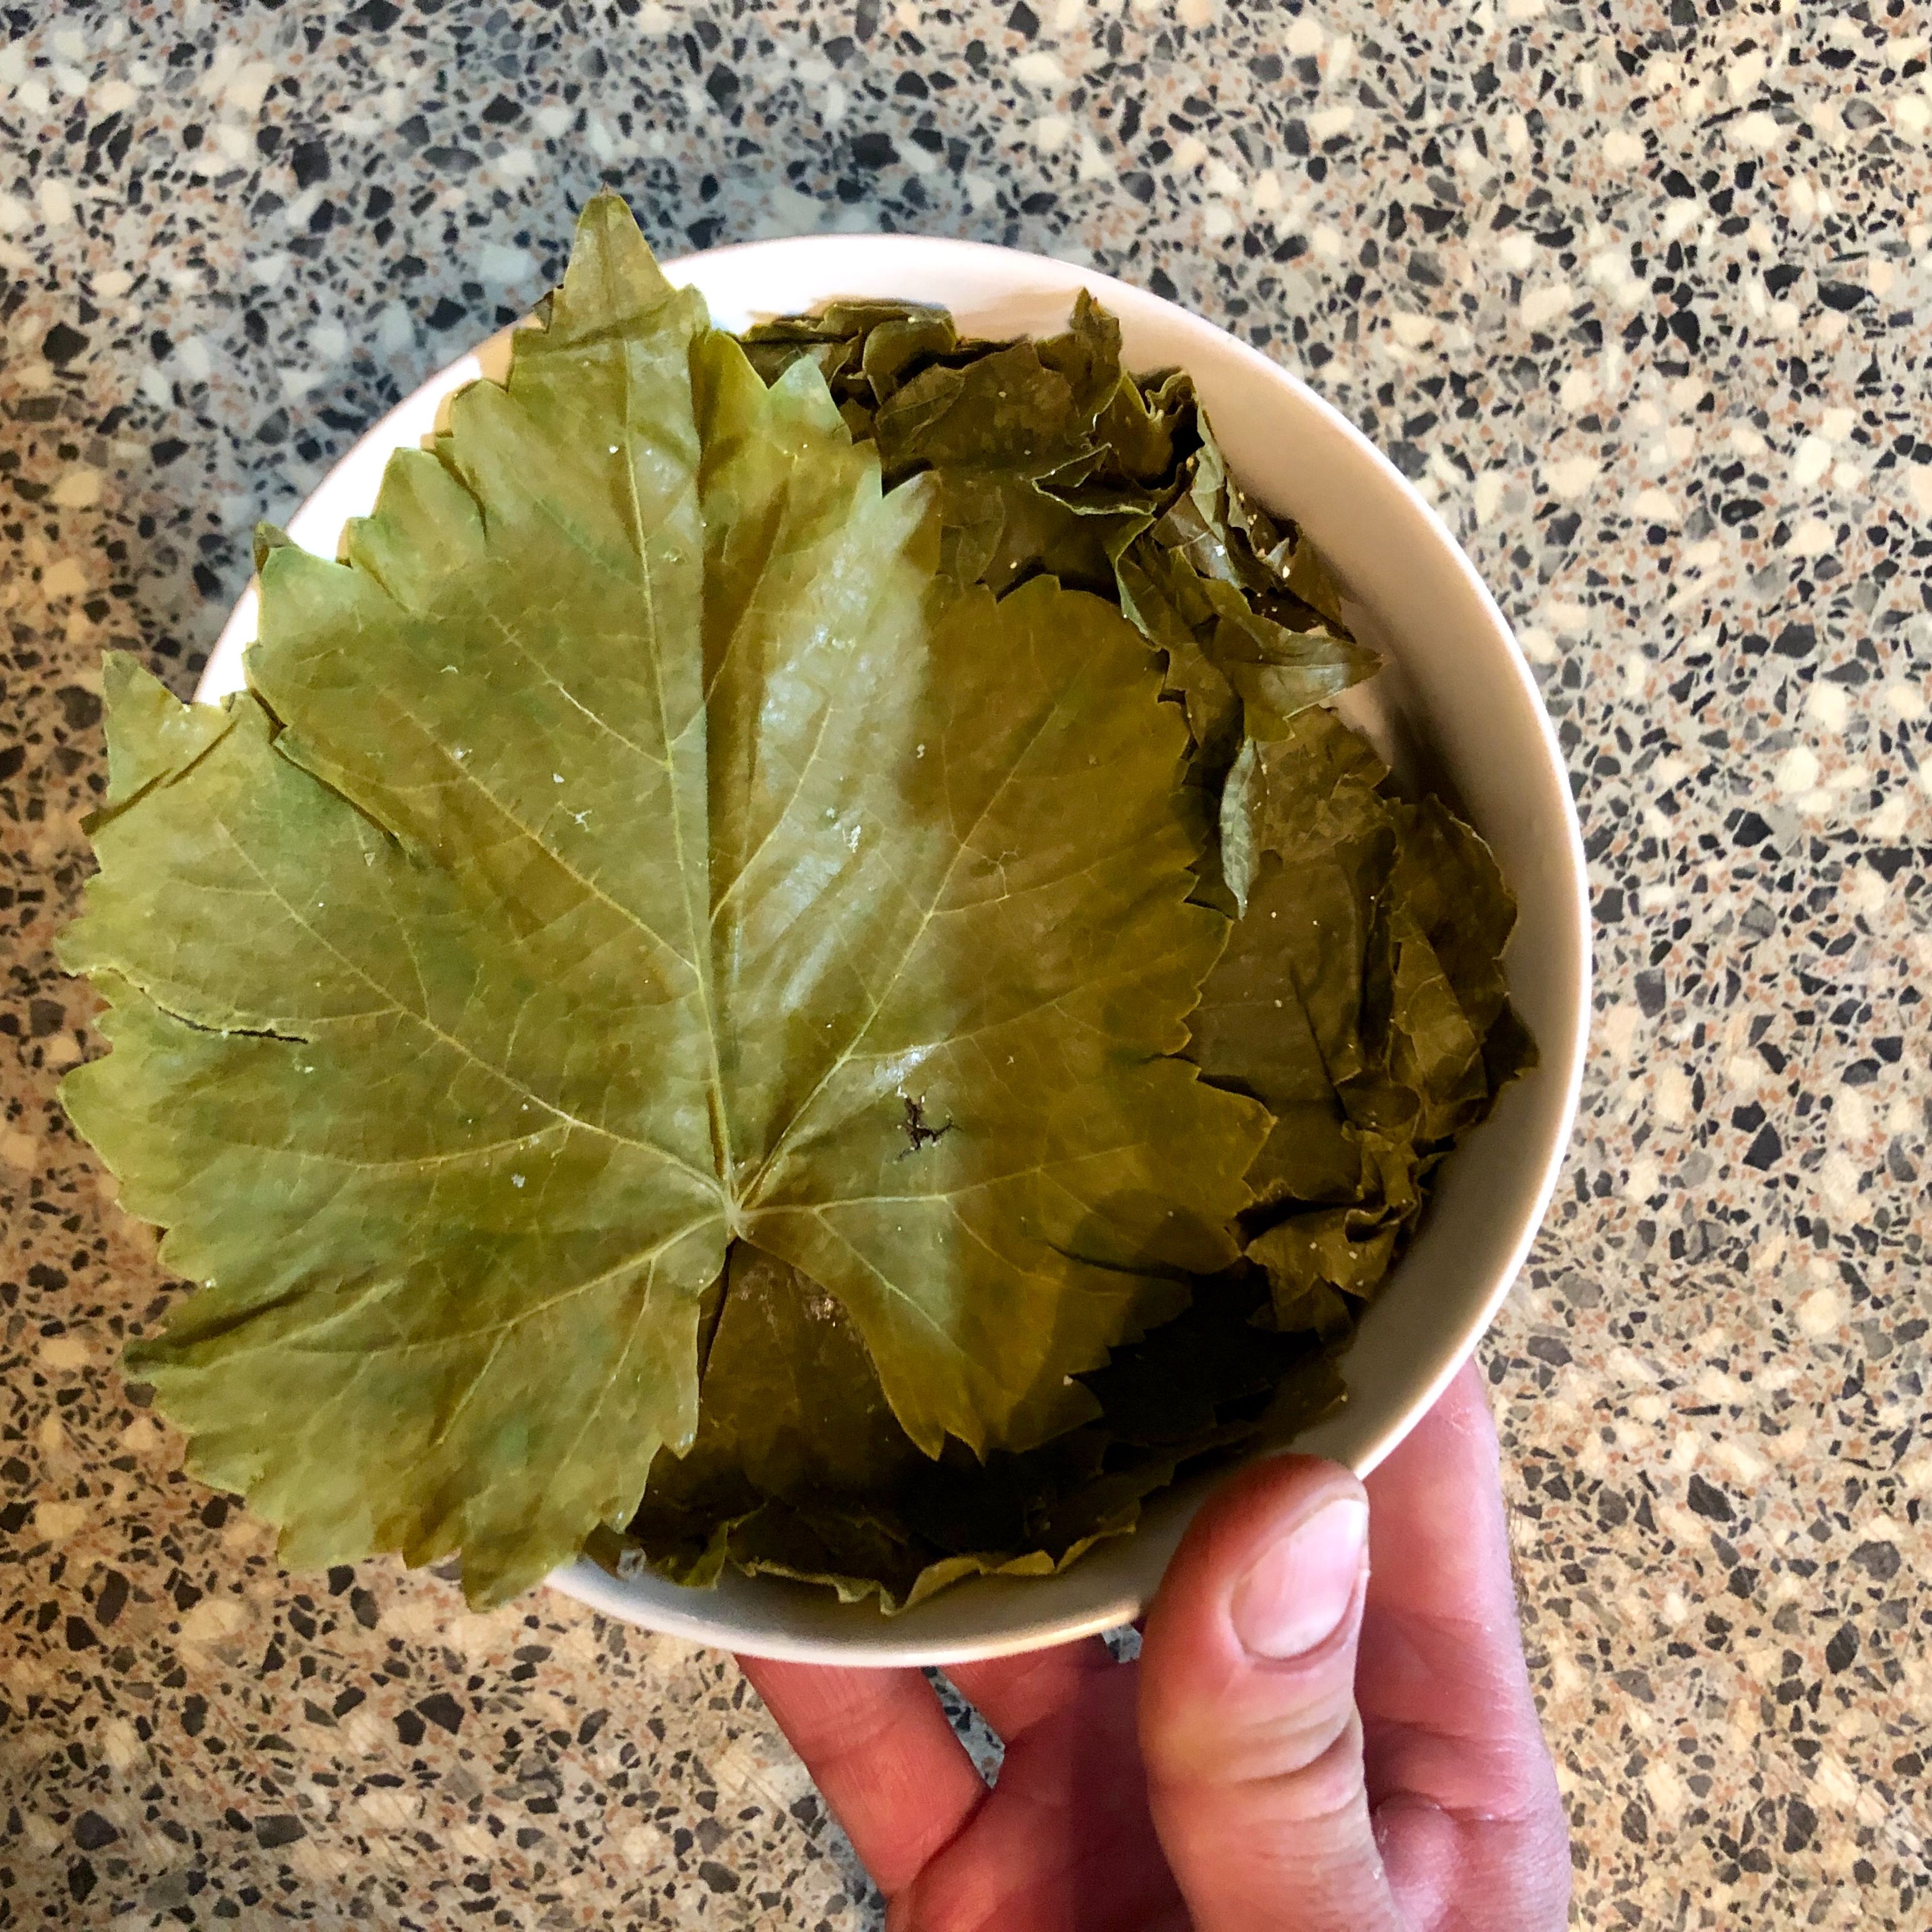 If using fresh grape leaves, cut off the stems and blanch them in boiling water first. But if you are using canned leaves, wash in hot water.